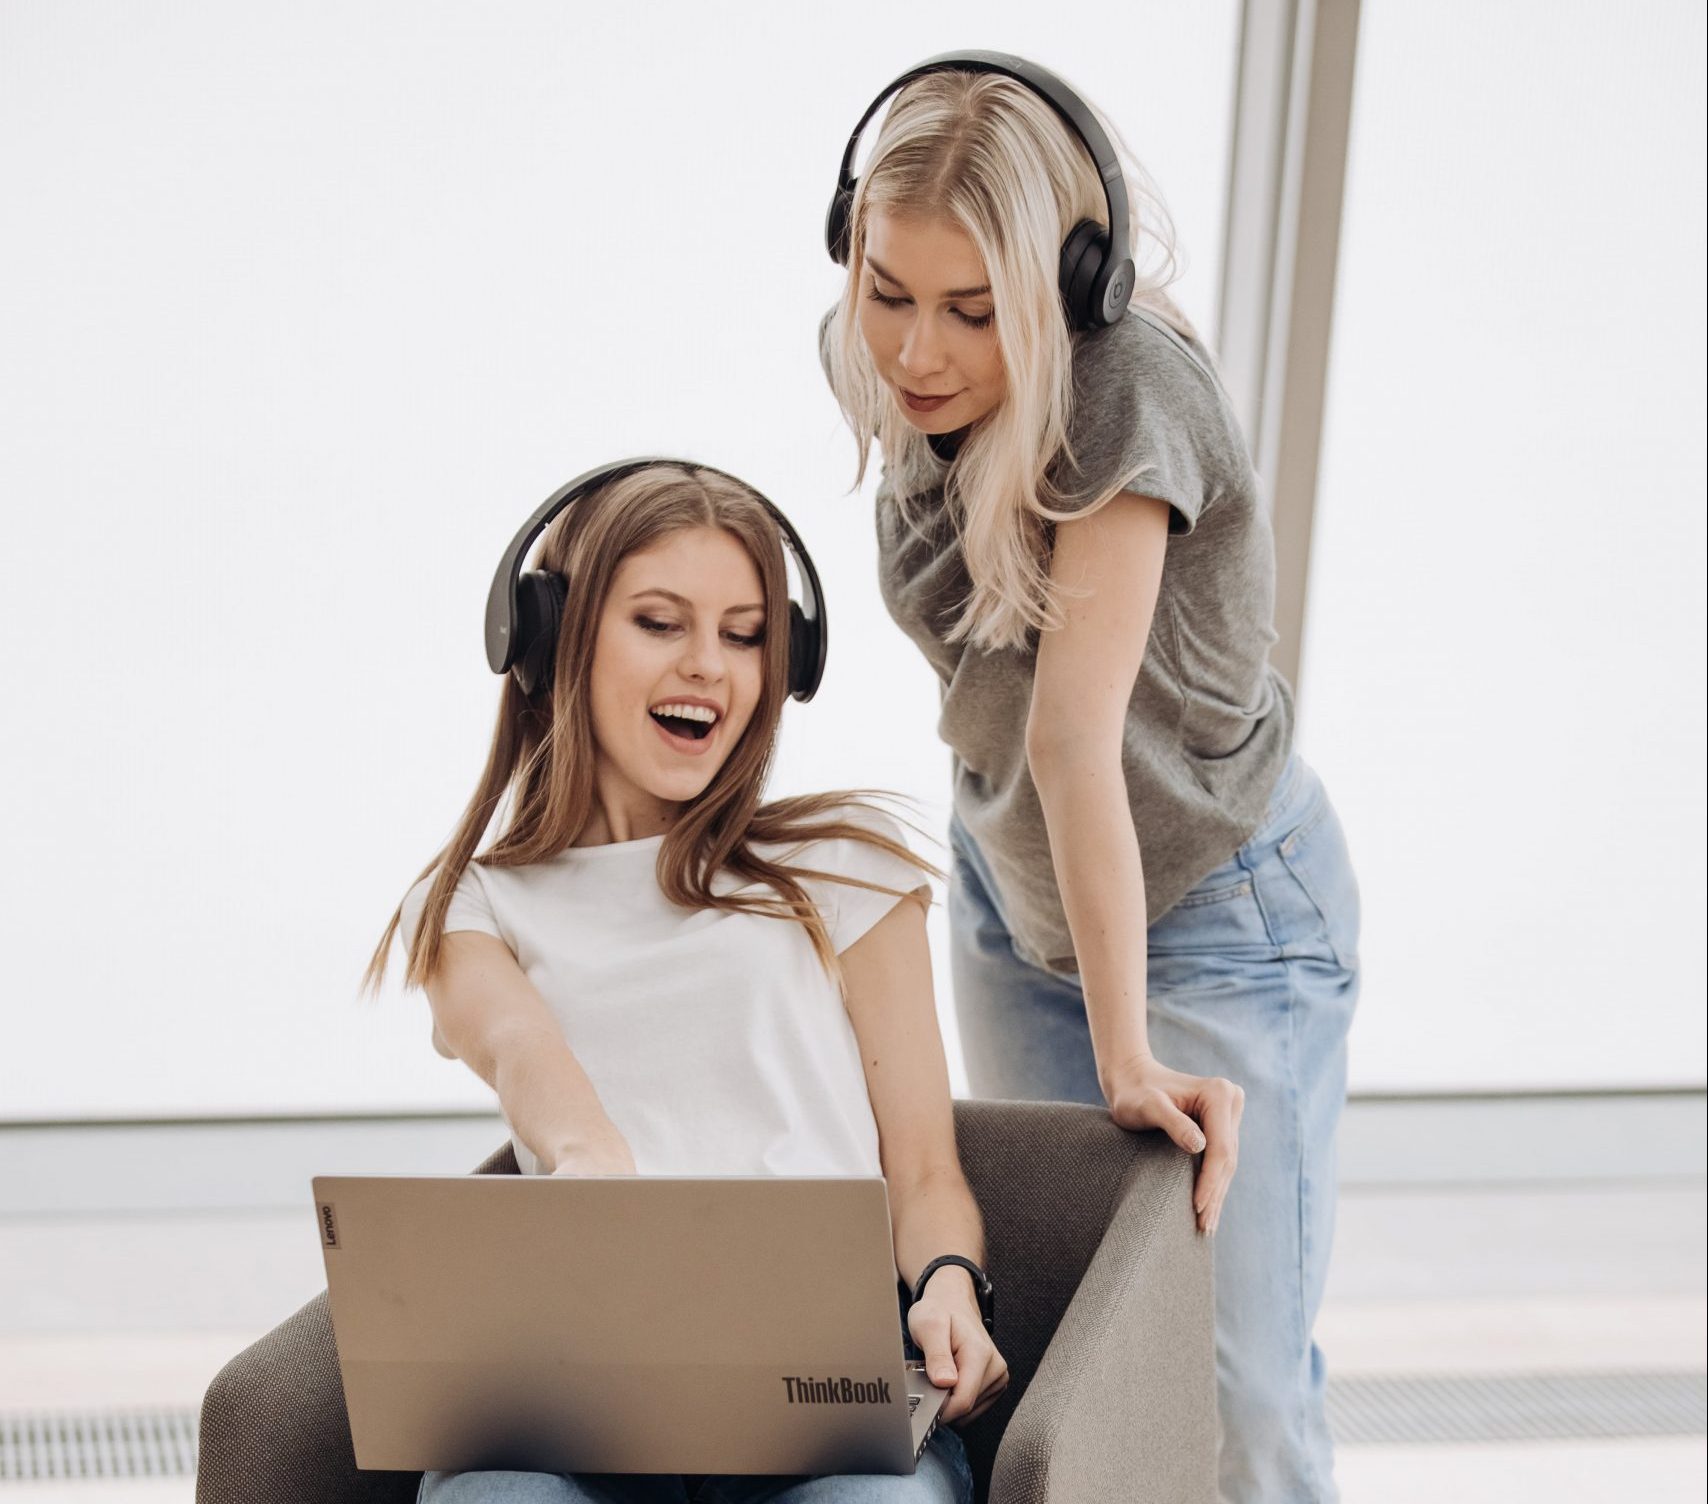 Two girls smiling with laptop and earphones